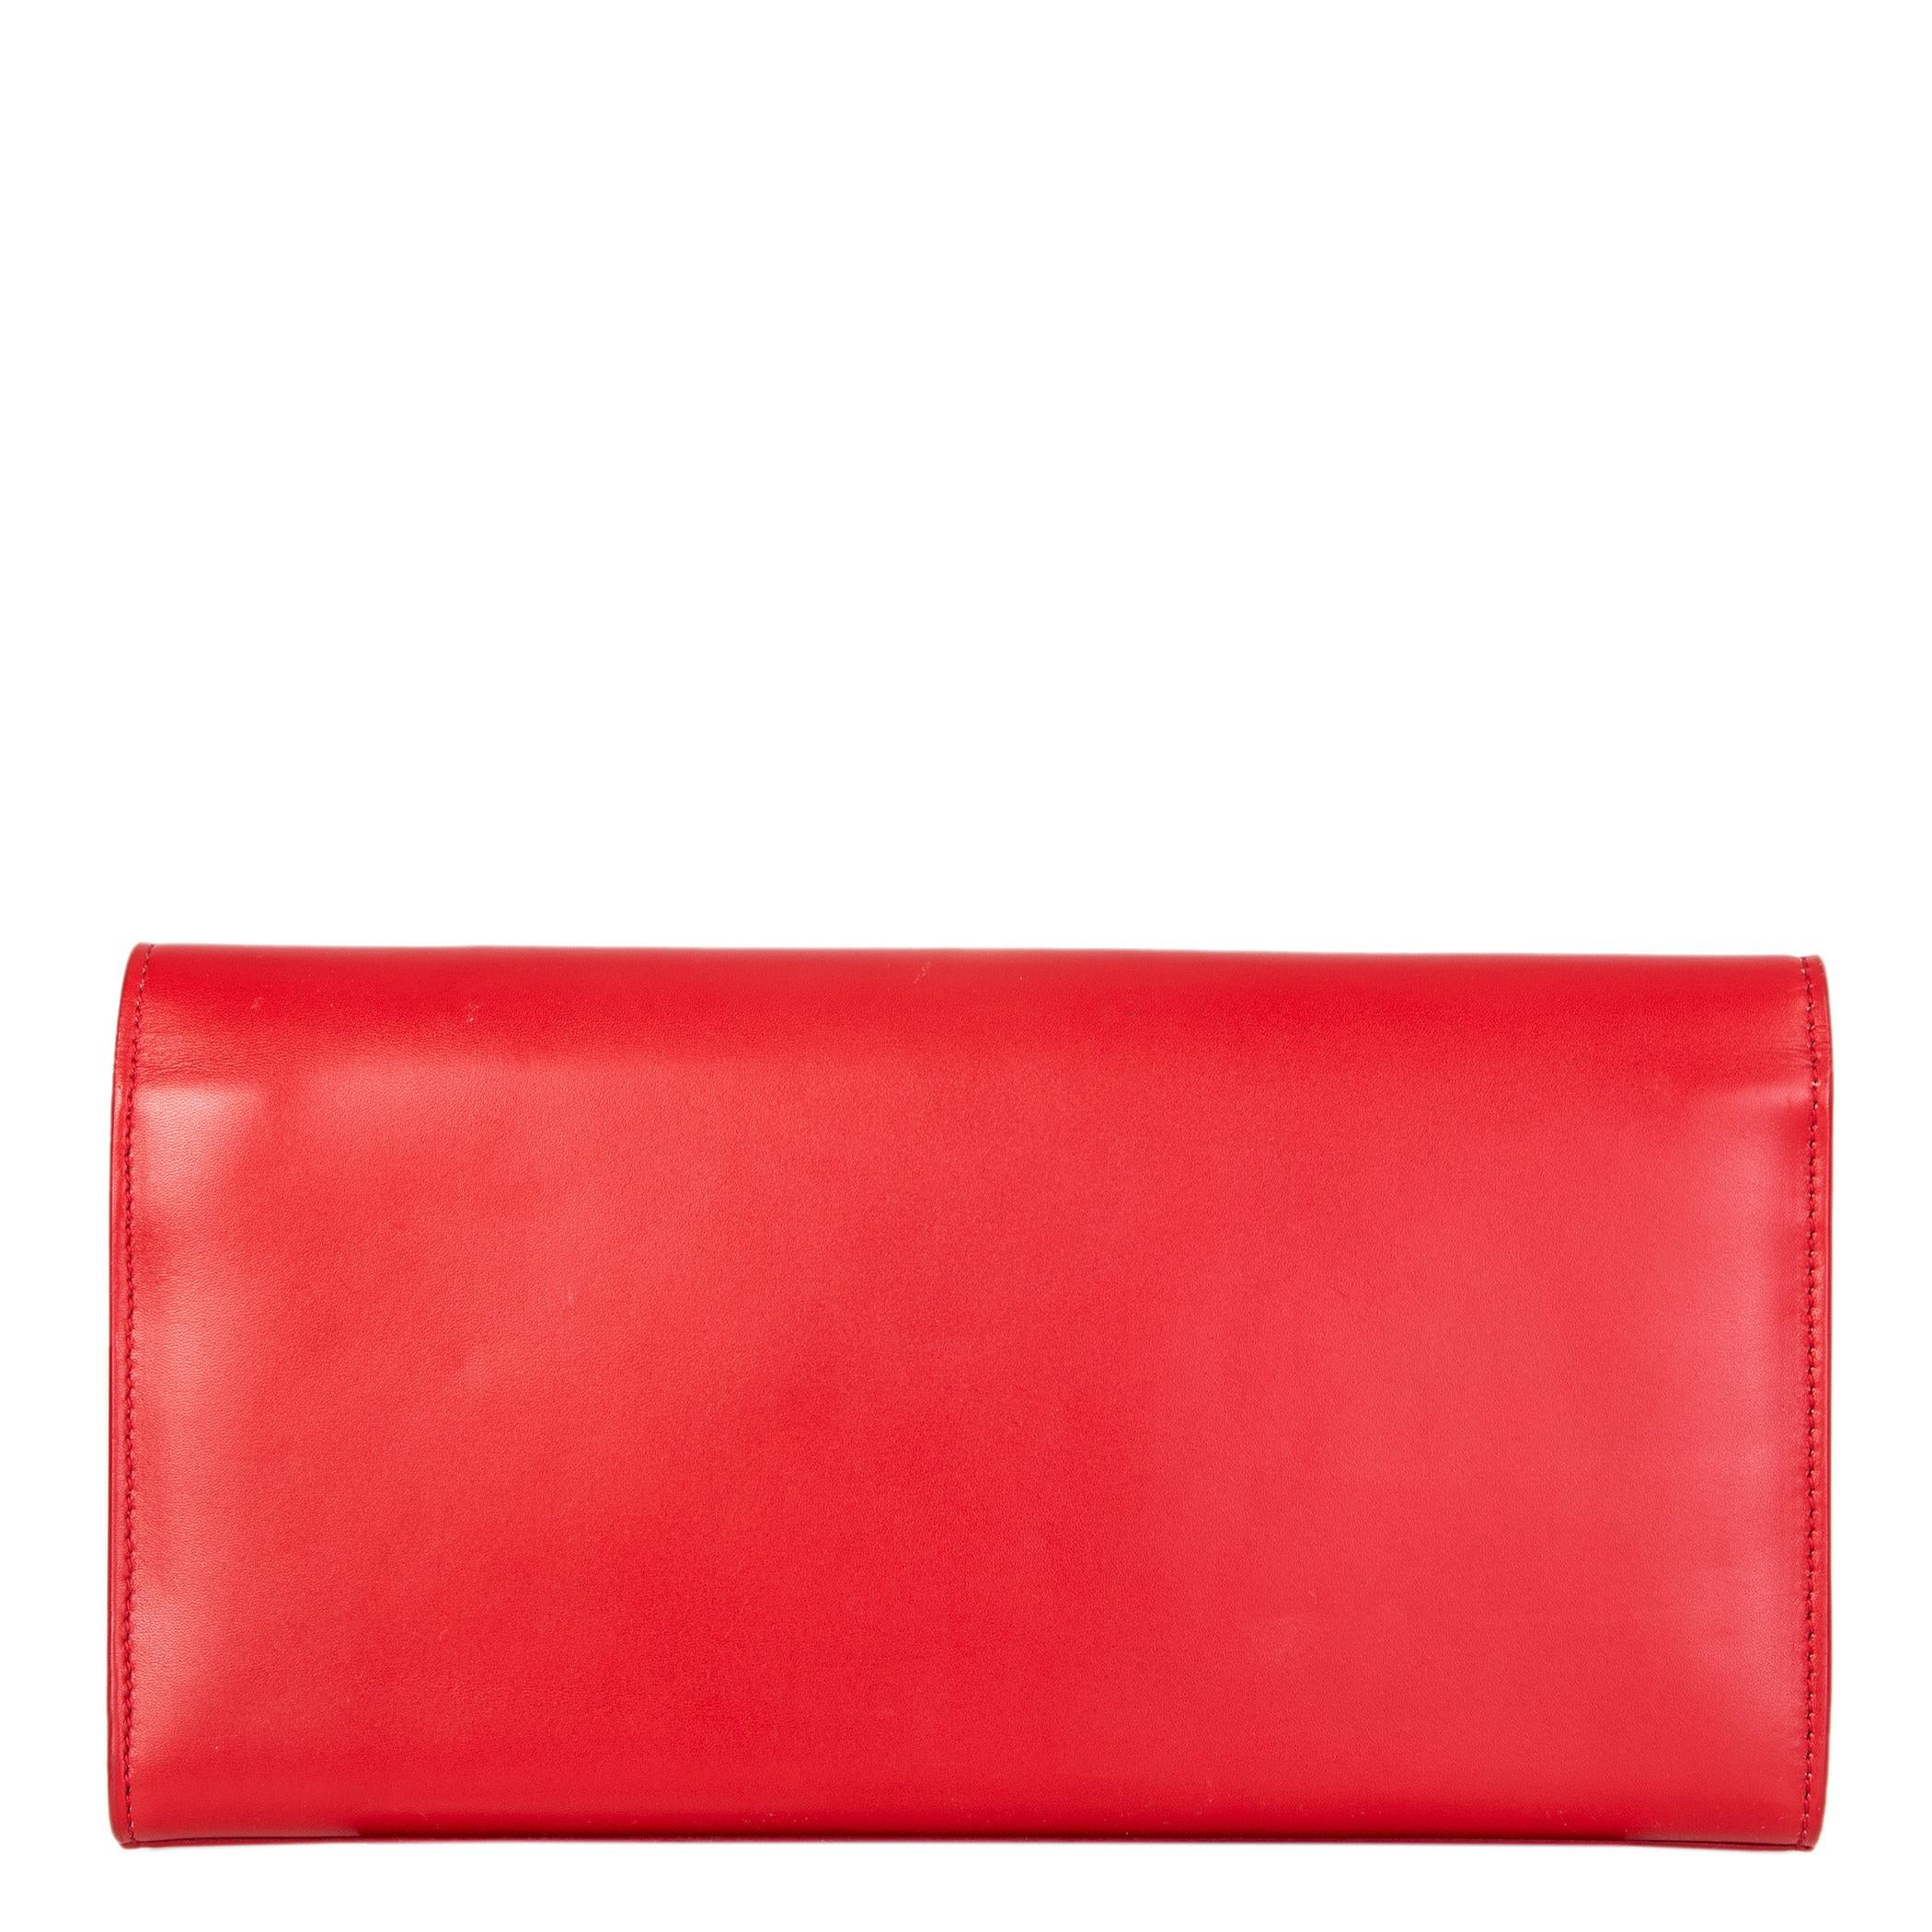 Red SAINT LAURENT red leather KATE FLAP Clutch Bag